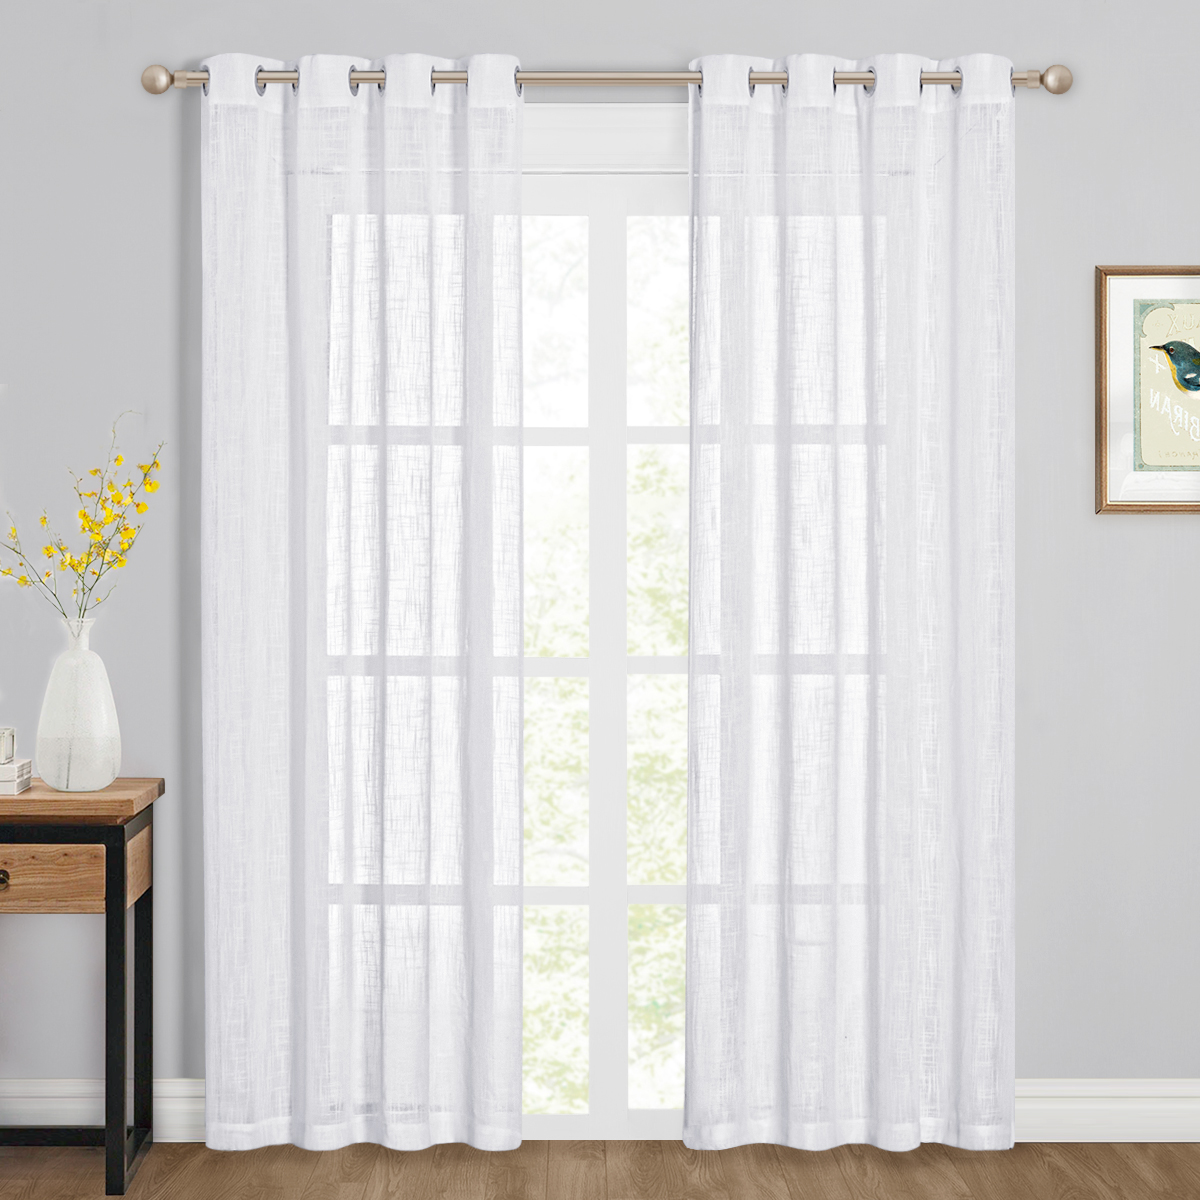 Faux Linen Sheer Curtain - Privacy Semitransparent Light Filtering Semi Voile Sheer Drapes For Bathroom,sold As 1 Panel